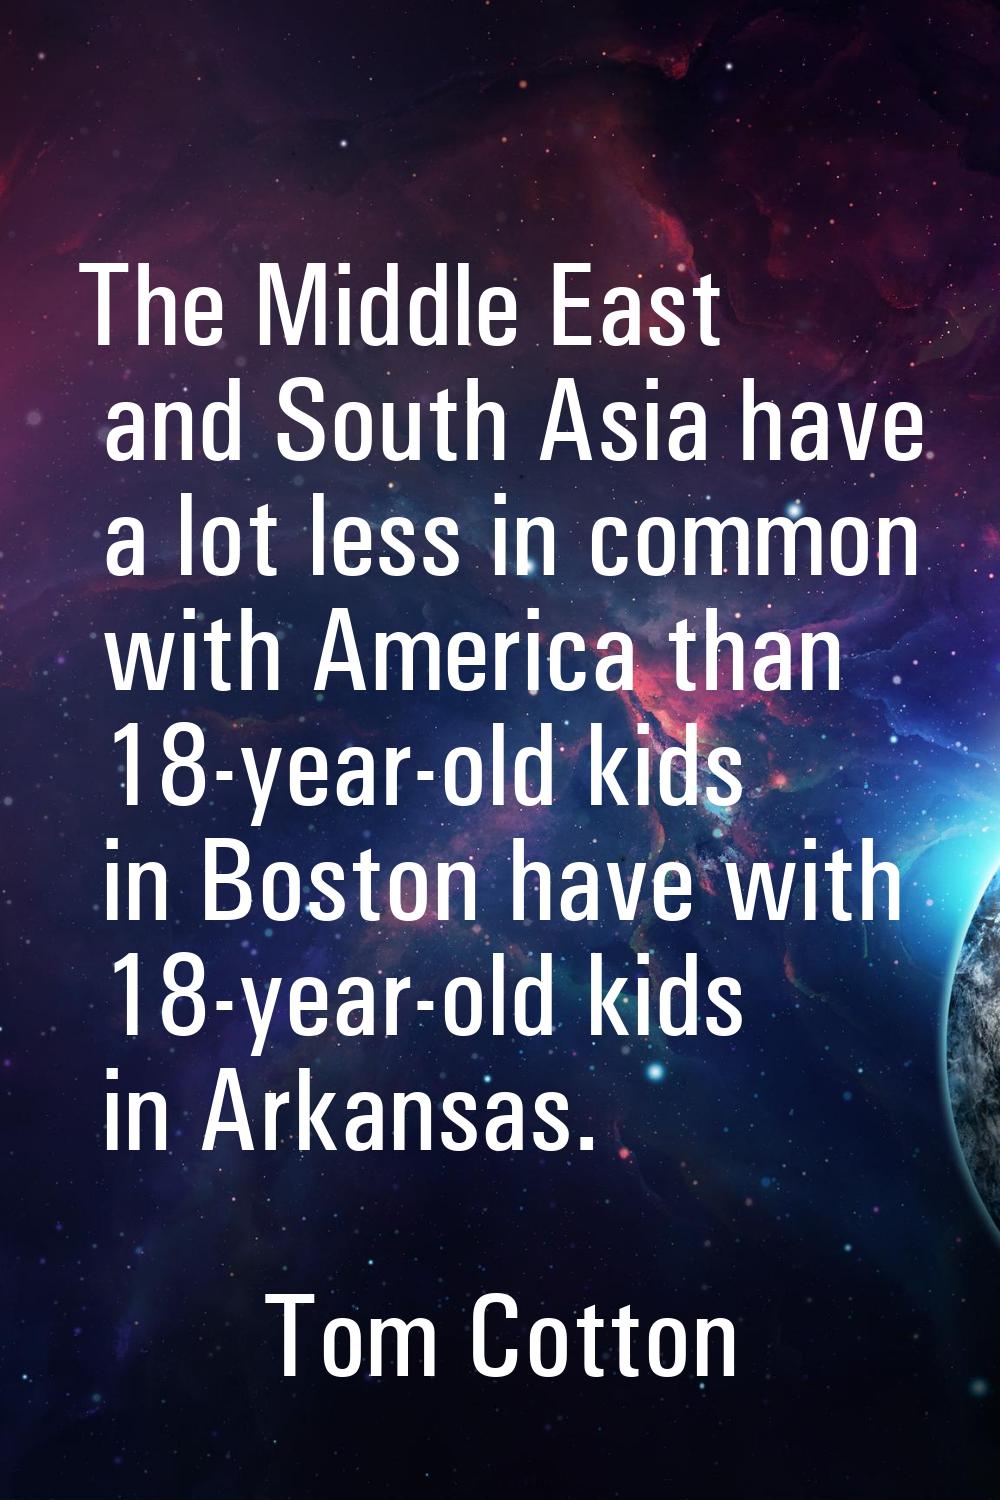 The Middle East and South Asia have a lot less in common with America than 18-year-old kids in Bost